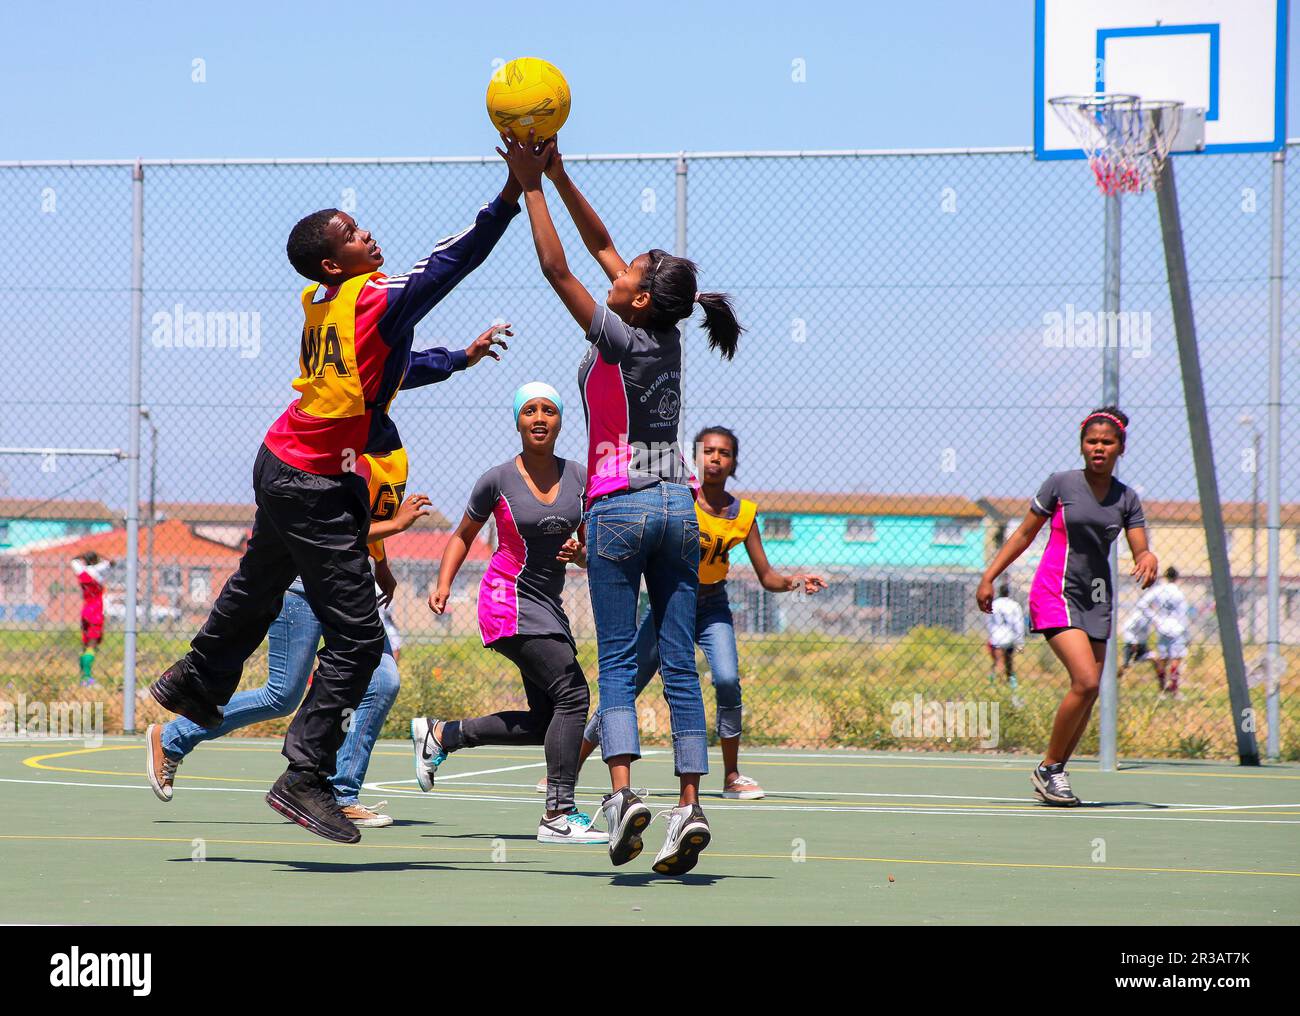 Diverse children playing Netball at school Stock Photo